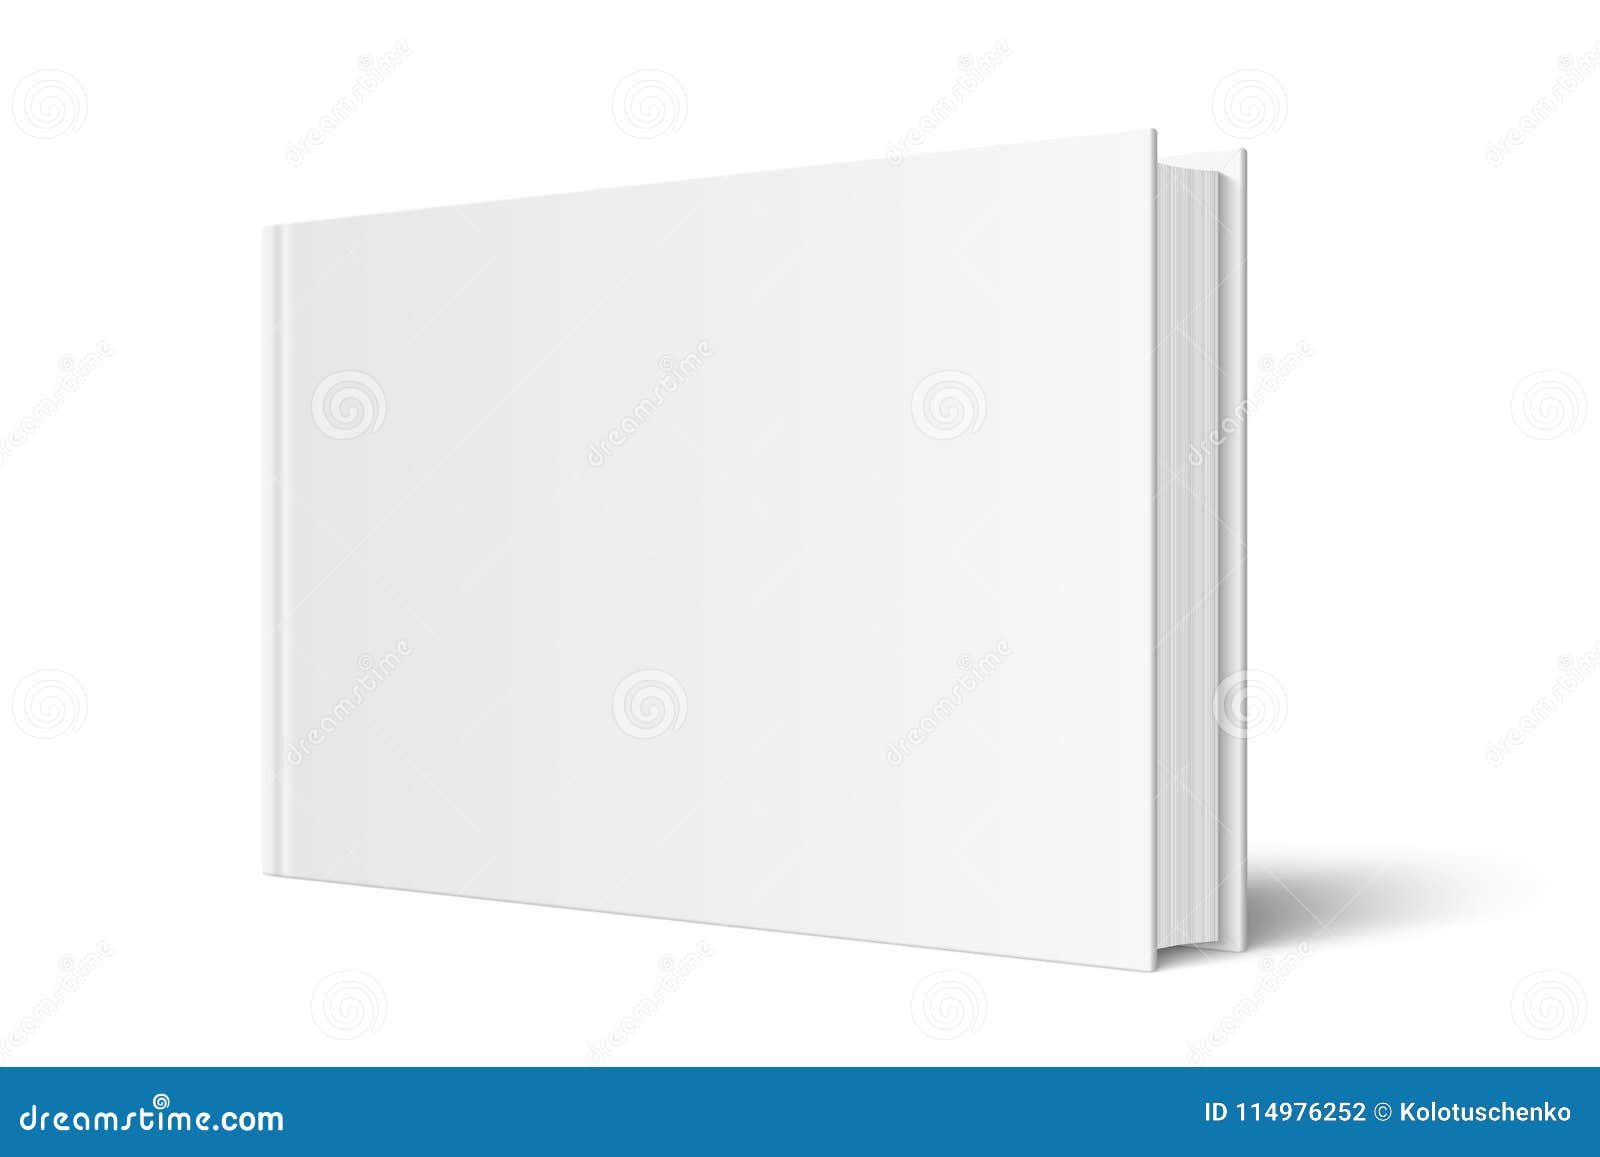  mock up of standing book